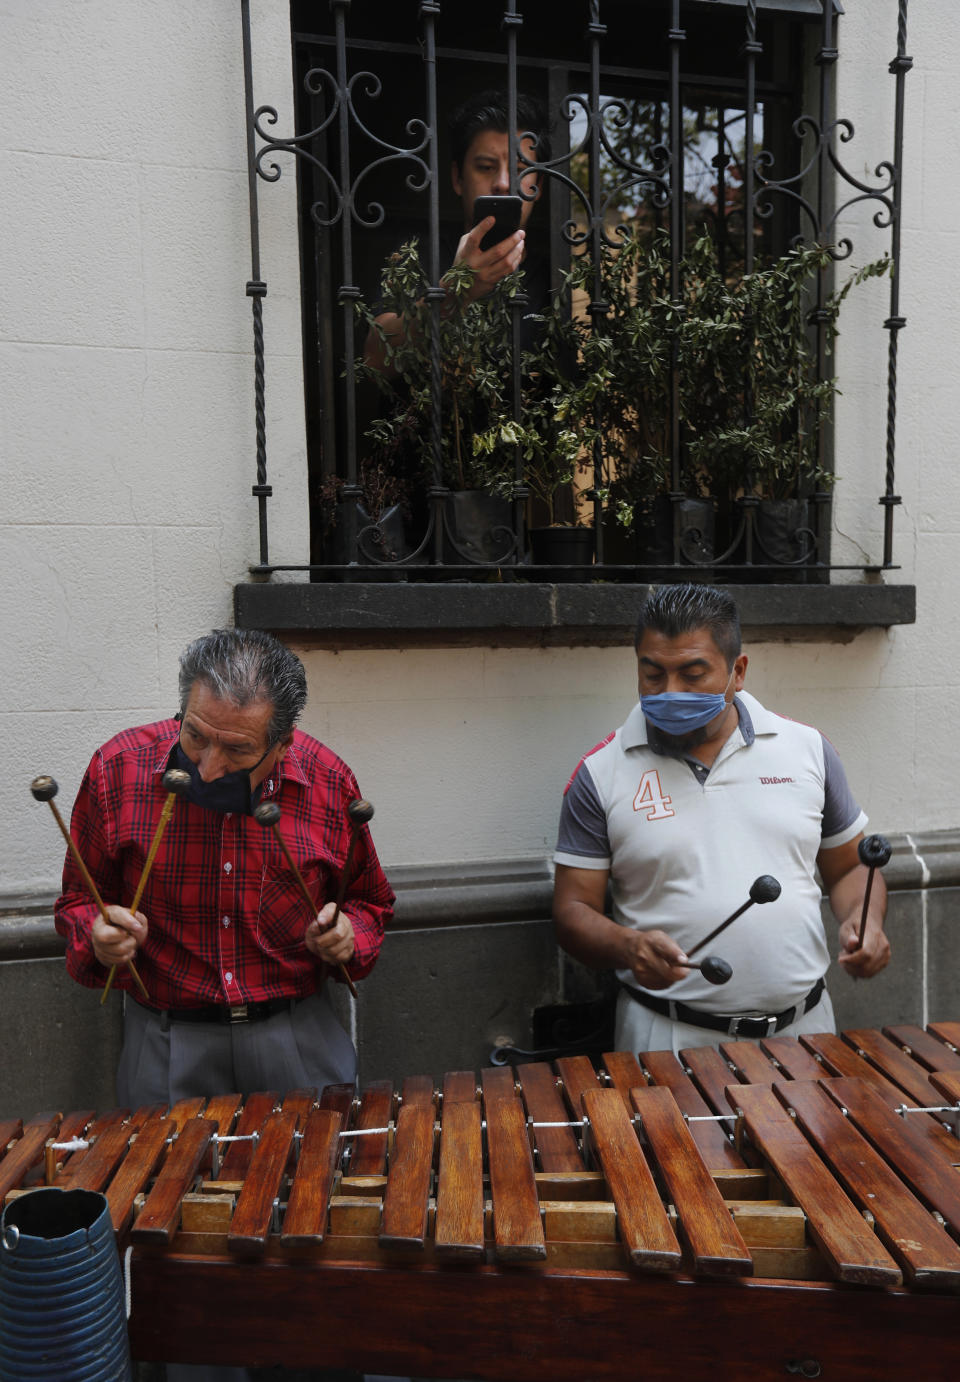 Marimba musicians wearing protective face masks perform outside an apartment building as a resident records their performance from inside his apartment, in Mexico City, Thursday, April 16, 2020. The wandering musicians, who usually perform at restaurants, have taken to performing in neighborhoods in hopes that the residents in voluntary lockdown will tip them, which many do. (AP Photo/Marco Ugarte)